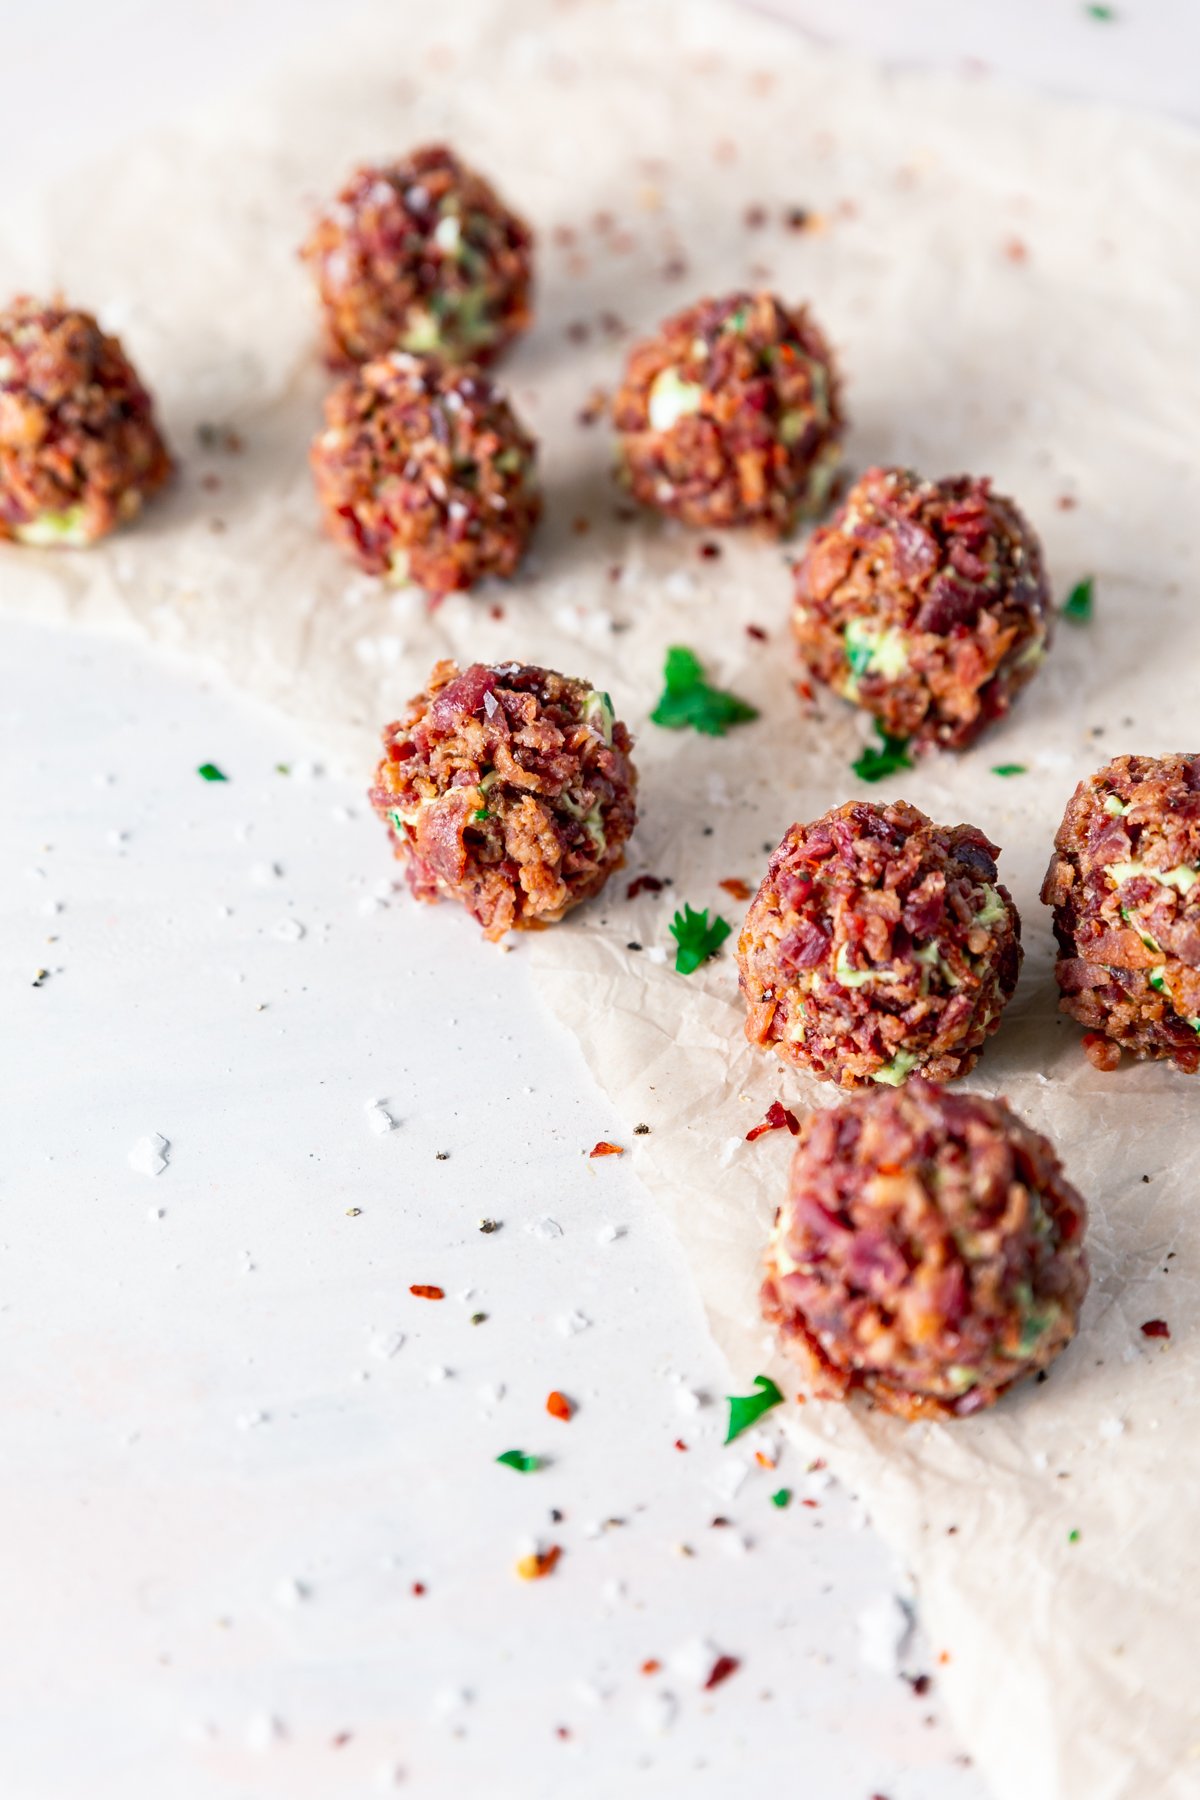 angled view of fat bomb balls covered with bits of crispy bacon, showing some avocado between pieces, surrounded in a sprinkling of salt, pepper, red pepper flakes, and cilantro